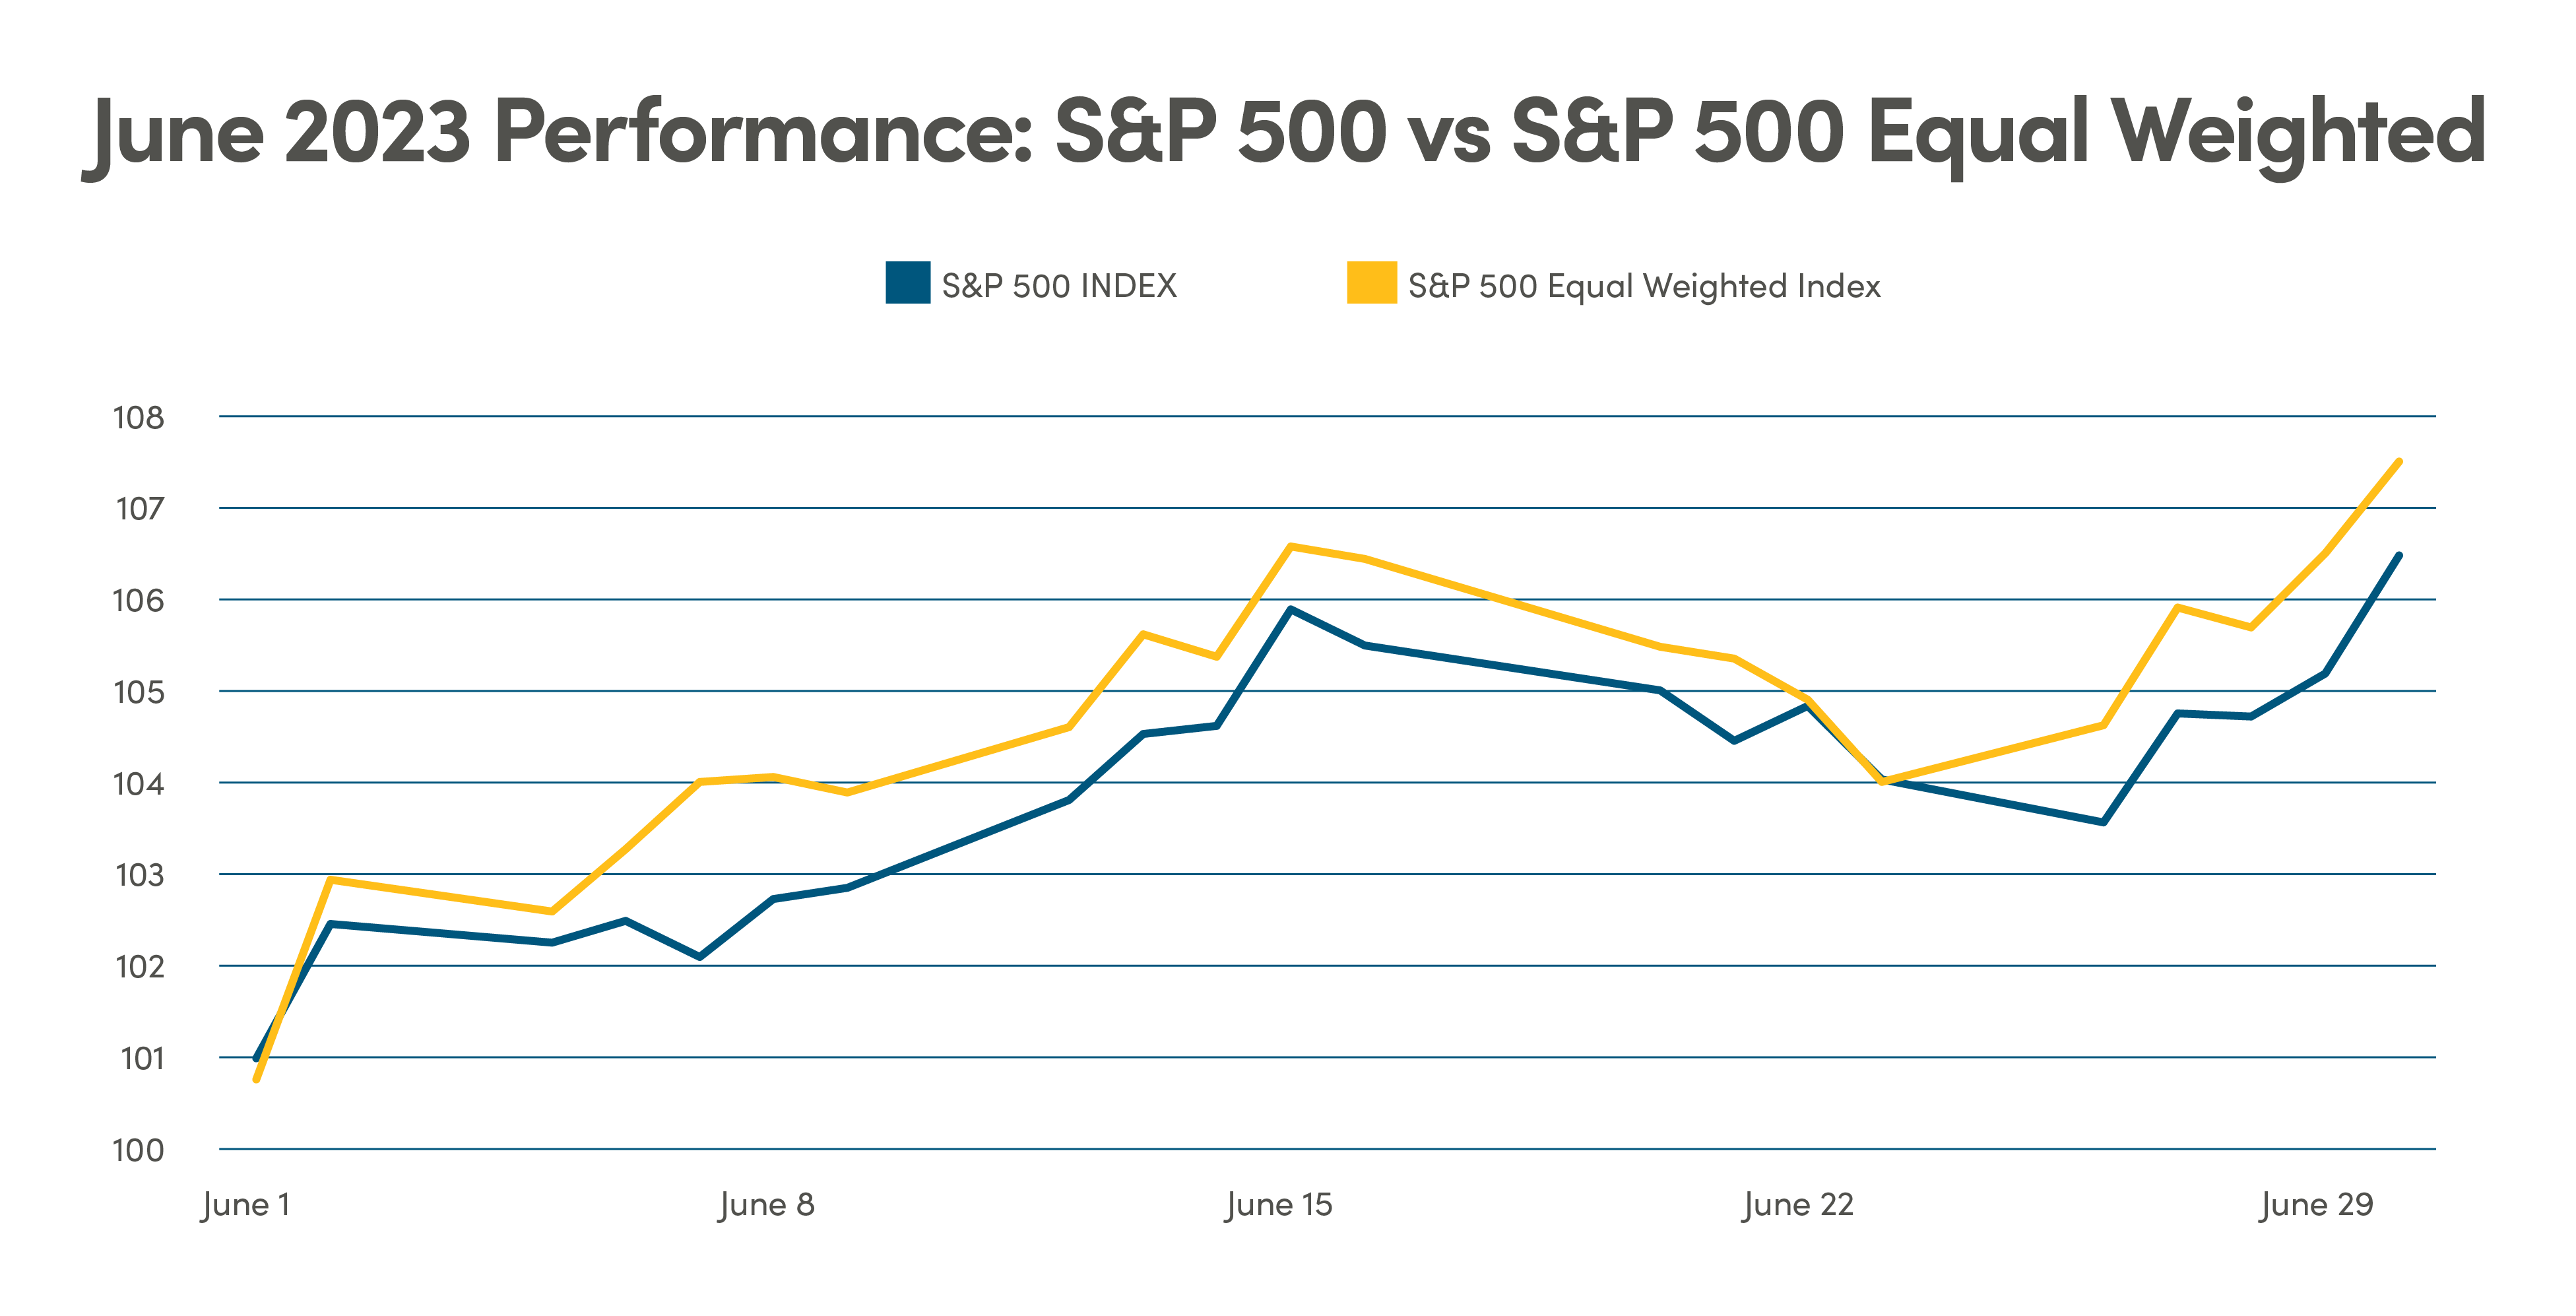 Graph comparing the June 2023 performance of the S&P 500 versus the S&P 500 Equal Weighted index